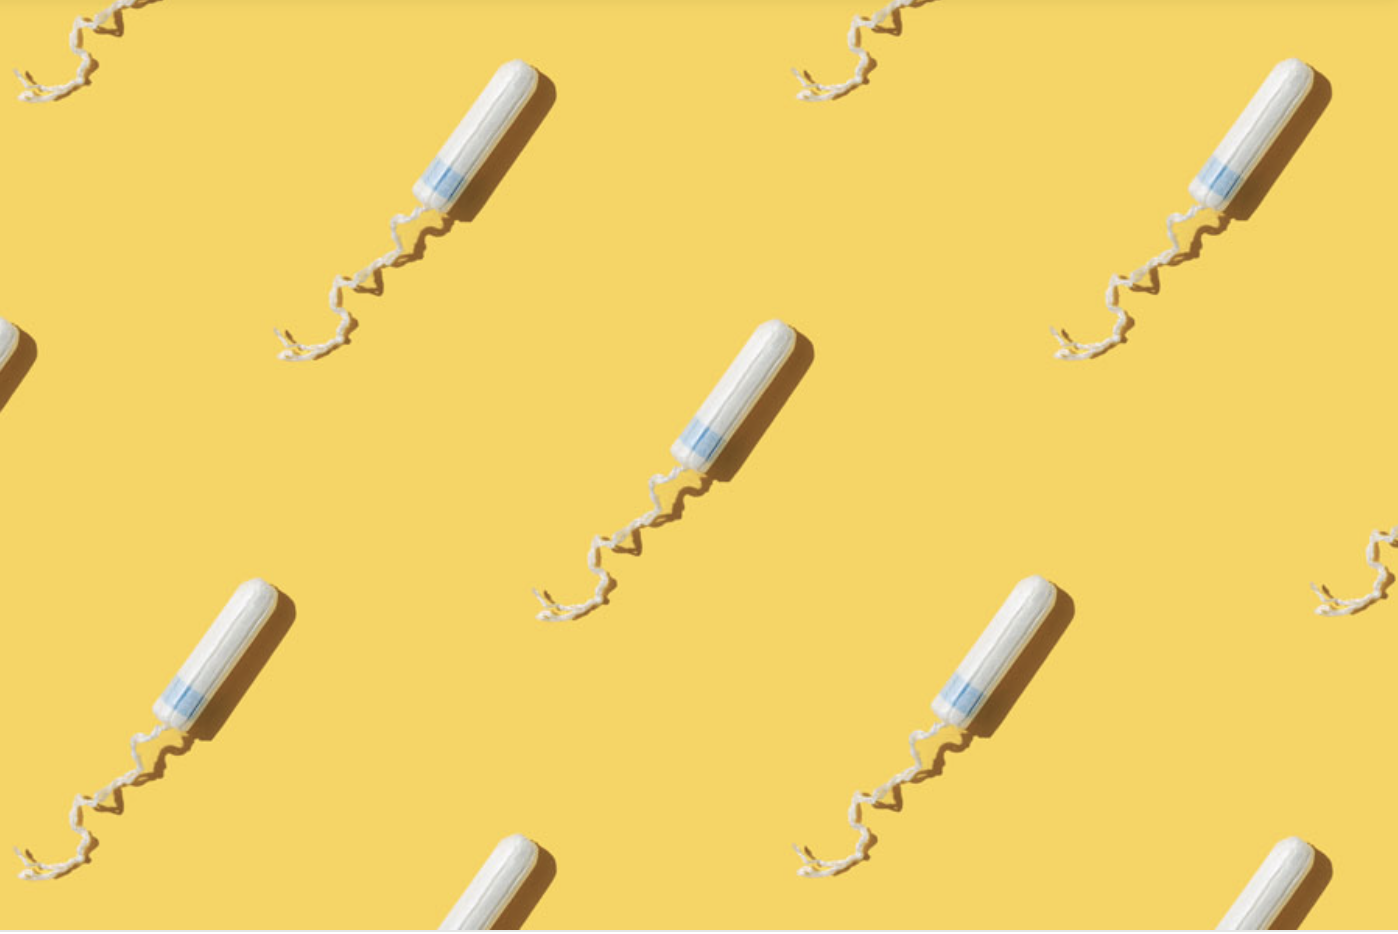 an illustration showing tampons